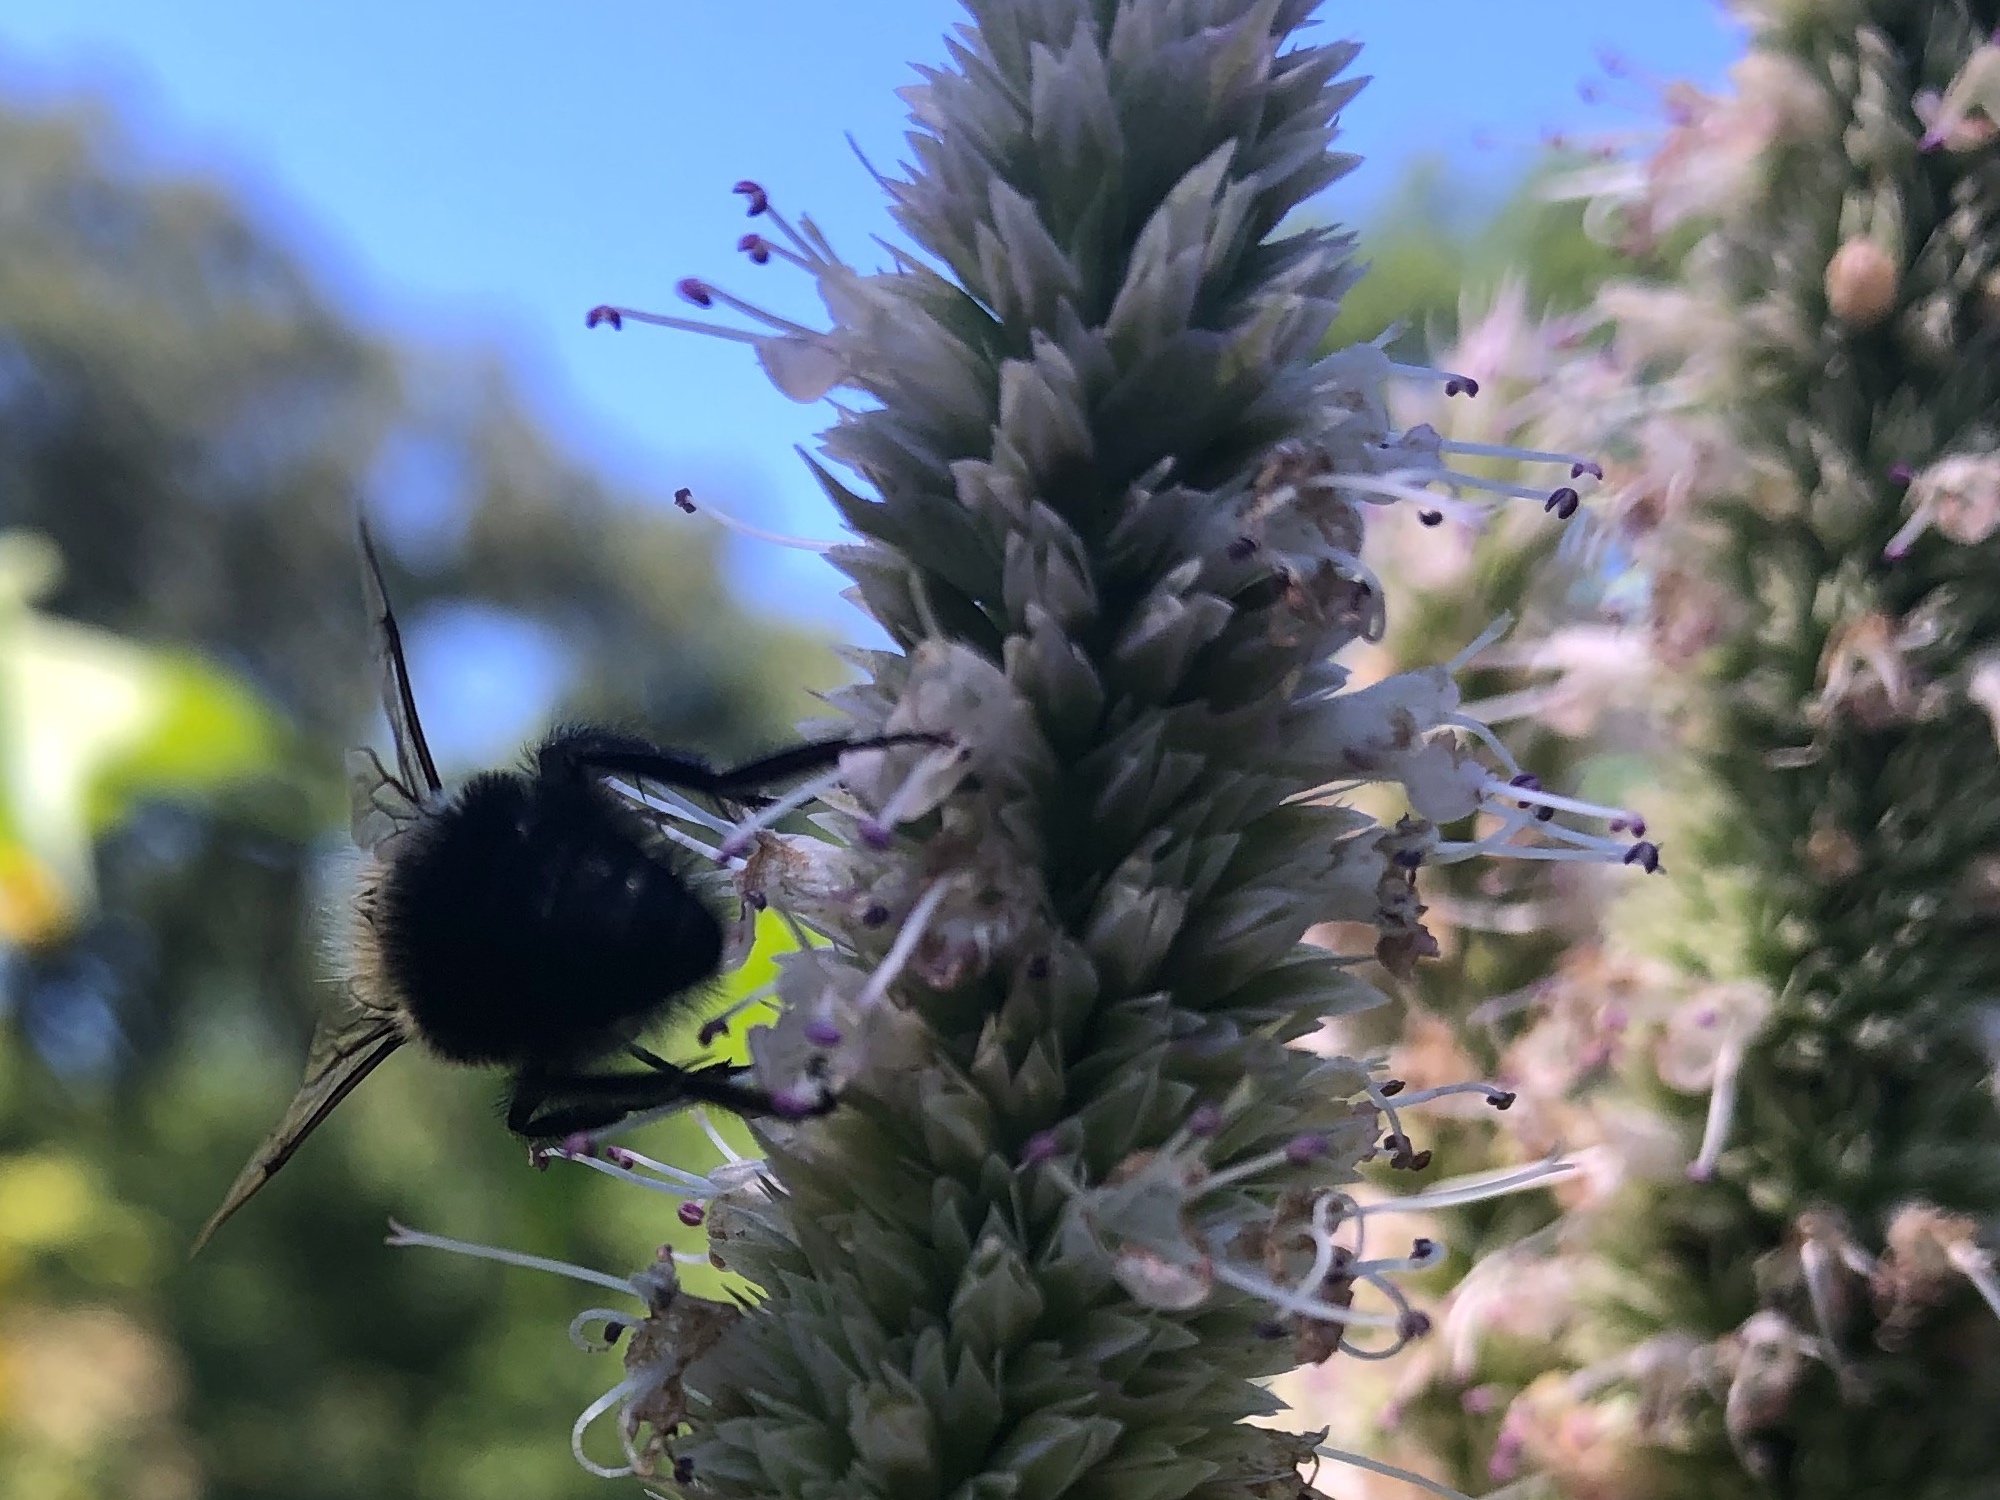 Bumblebee on Hyssop on August 11, 2020.